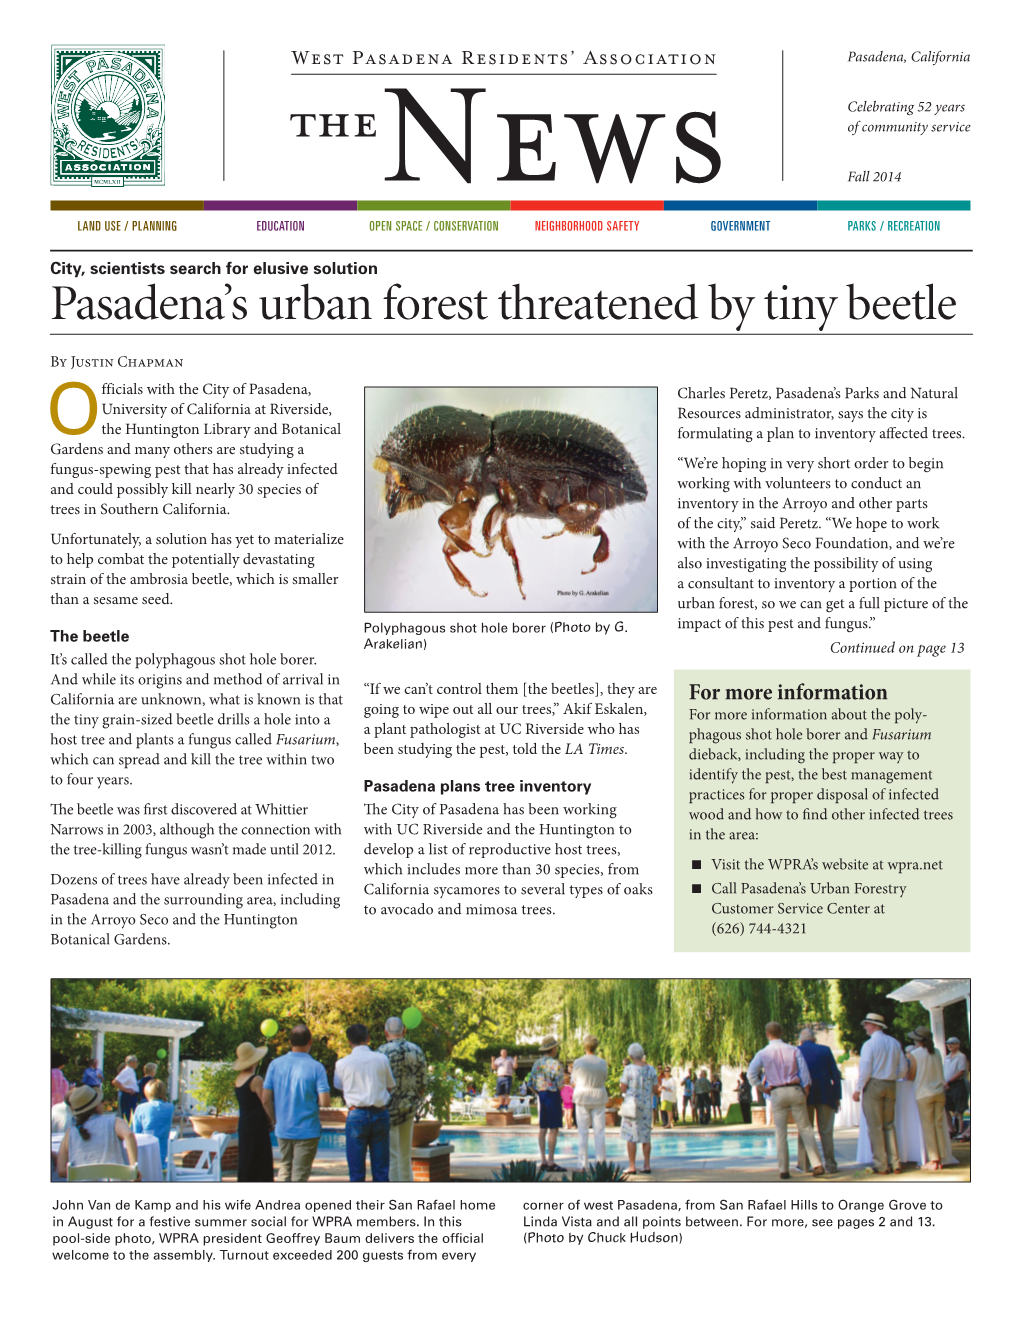 Pasadena's Urban Forest Threatened by Tiny Beetle